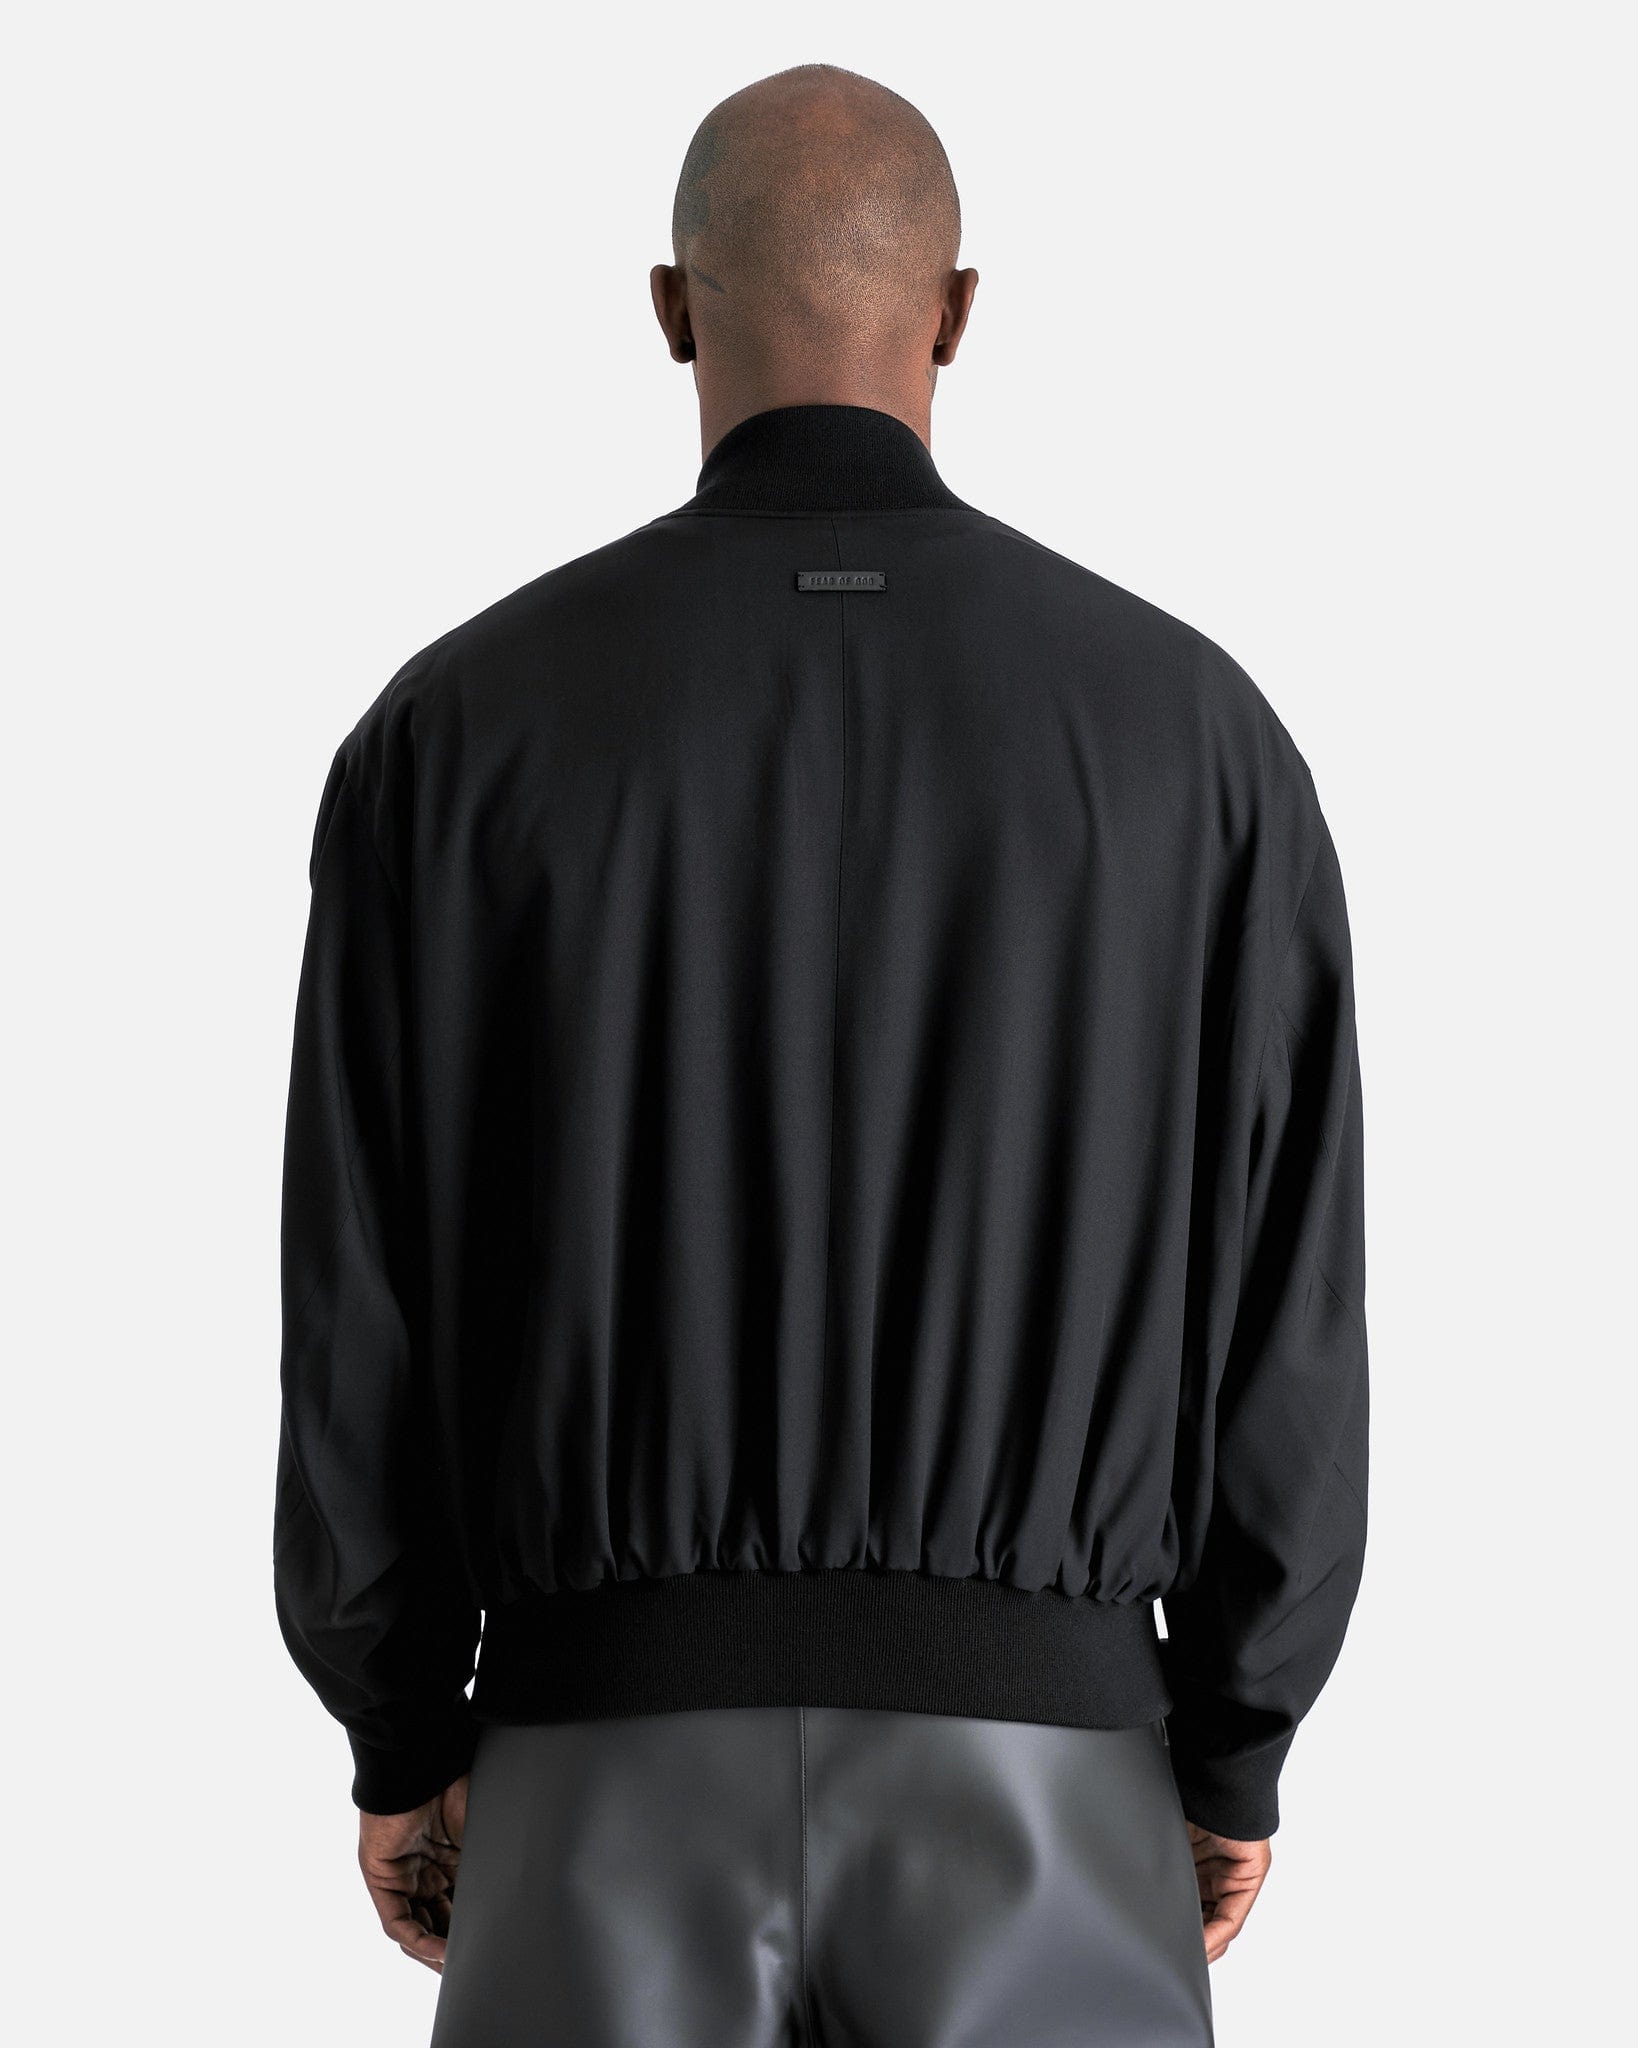 Fear of God Men's Jackets Double Layer Bomber in Black